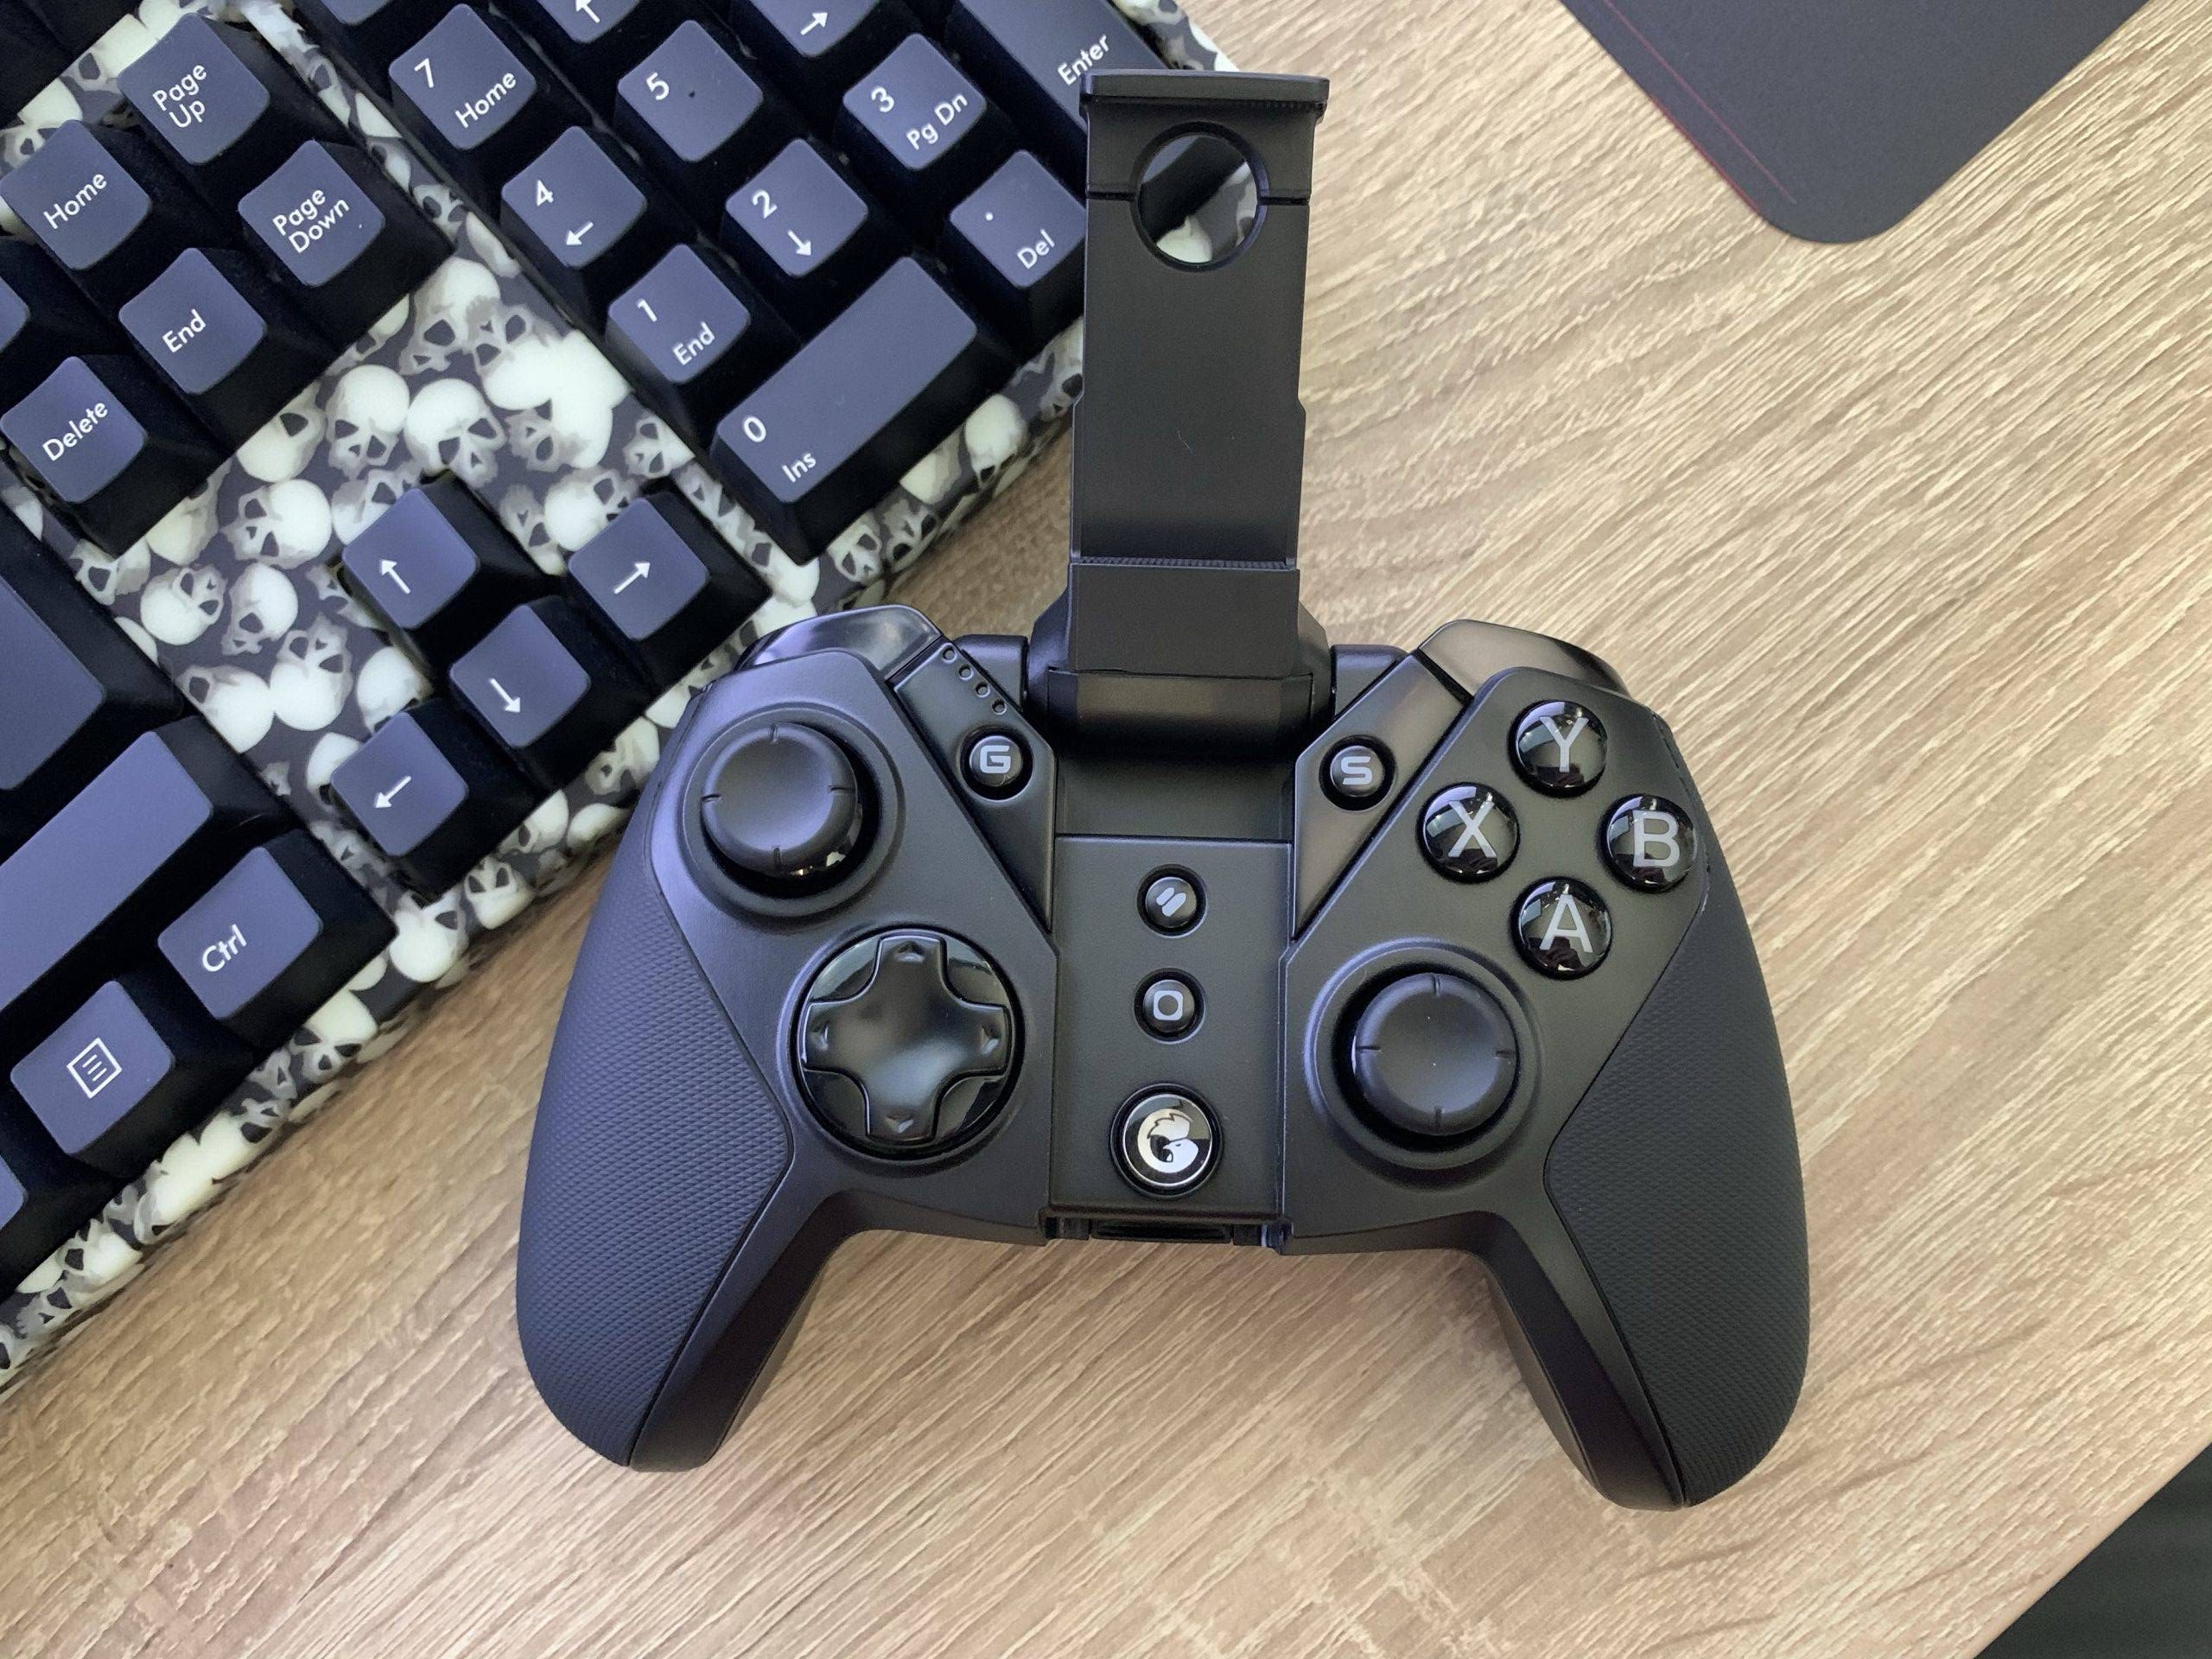 G4 Pro - A controller you can use with loads